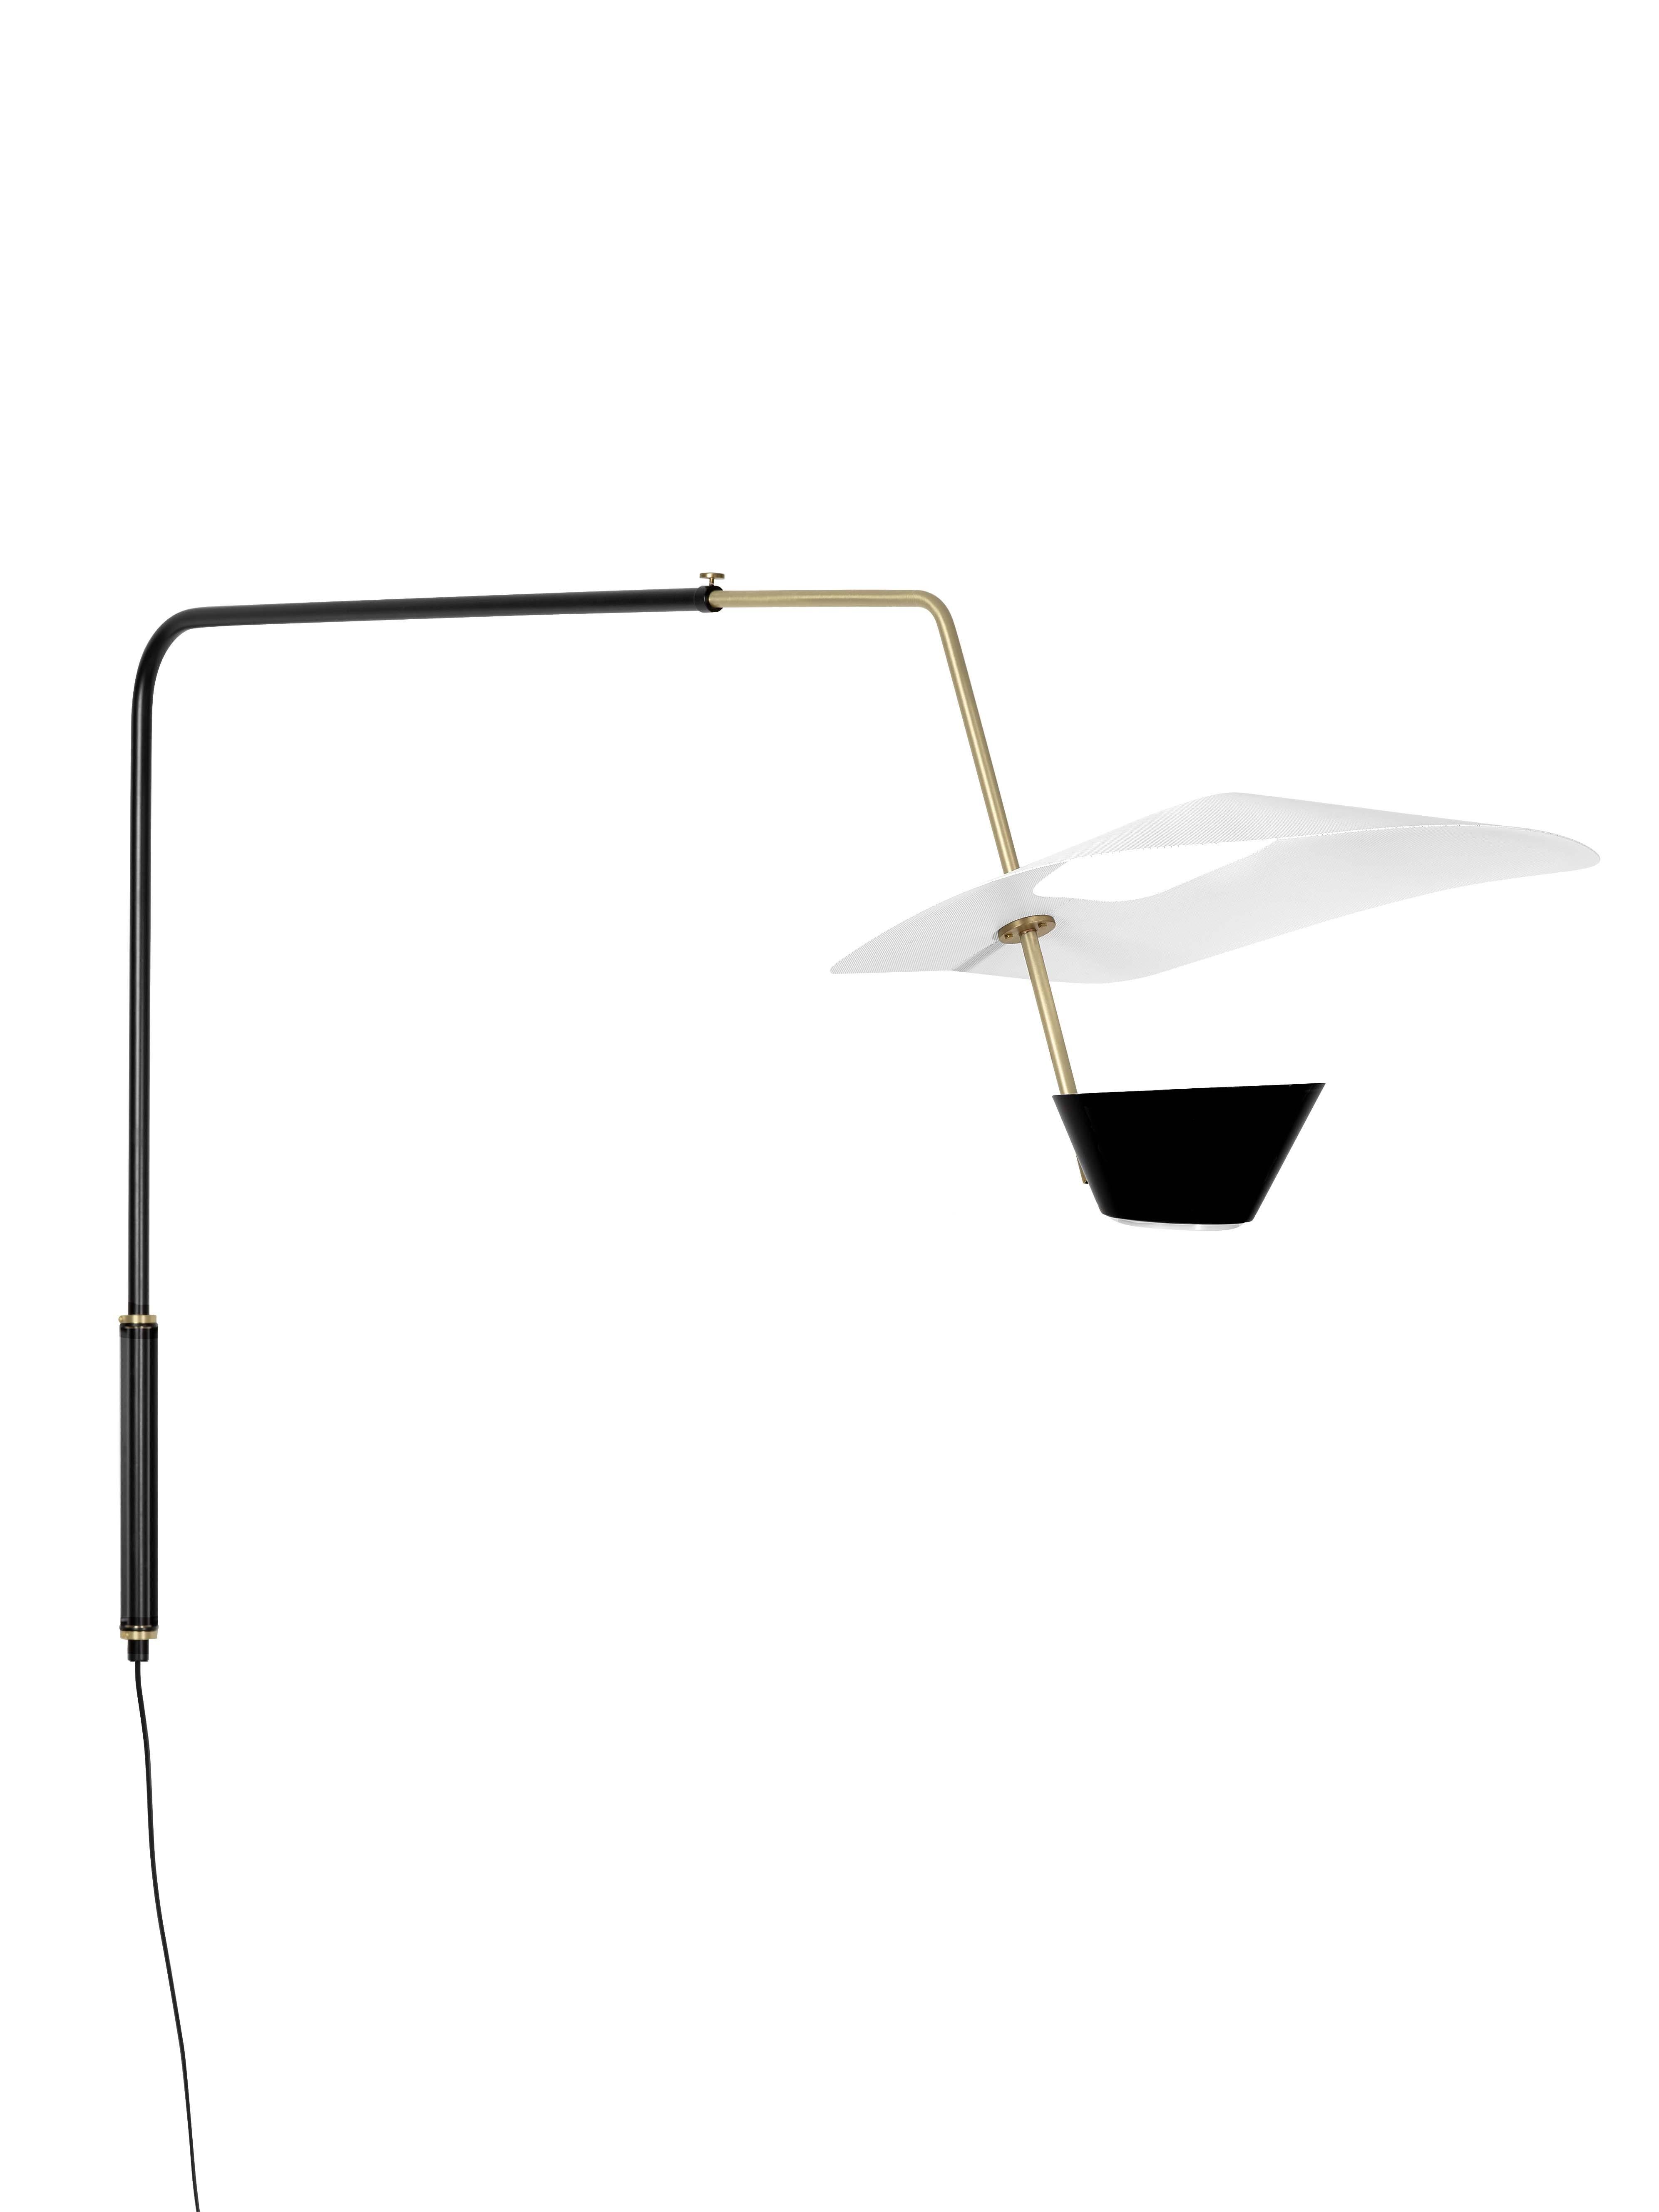 Large Pierre Guariche 'G25' Articulating Wall Lamp for Sammode Studio For Sale 5